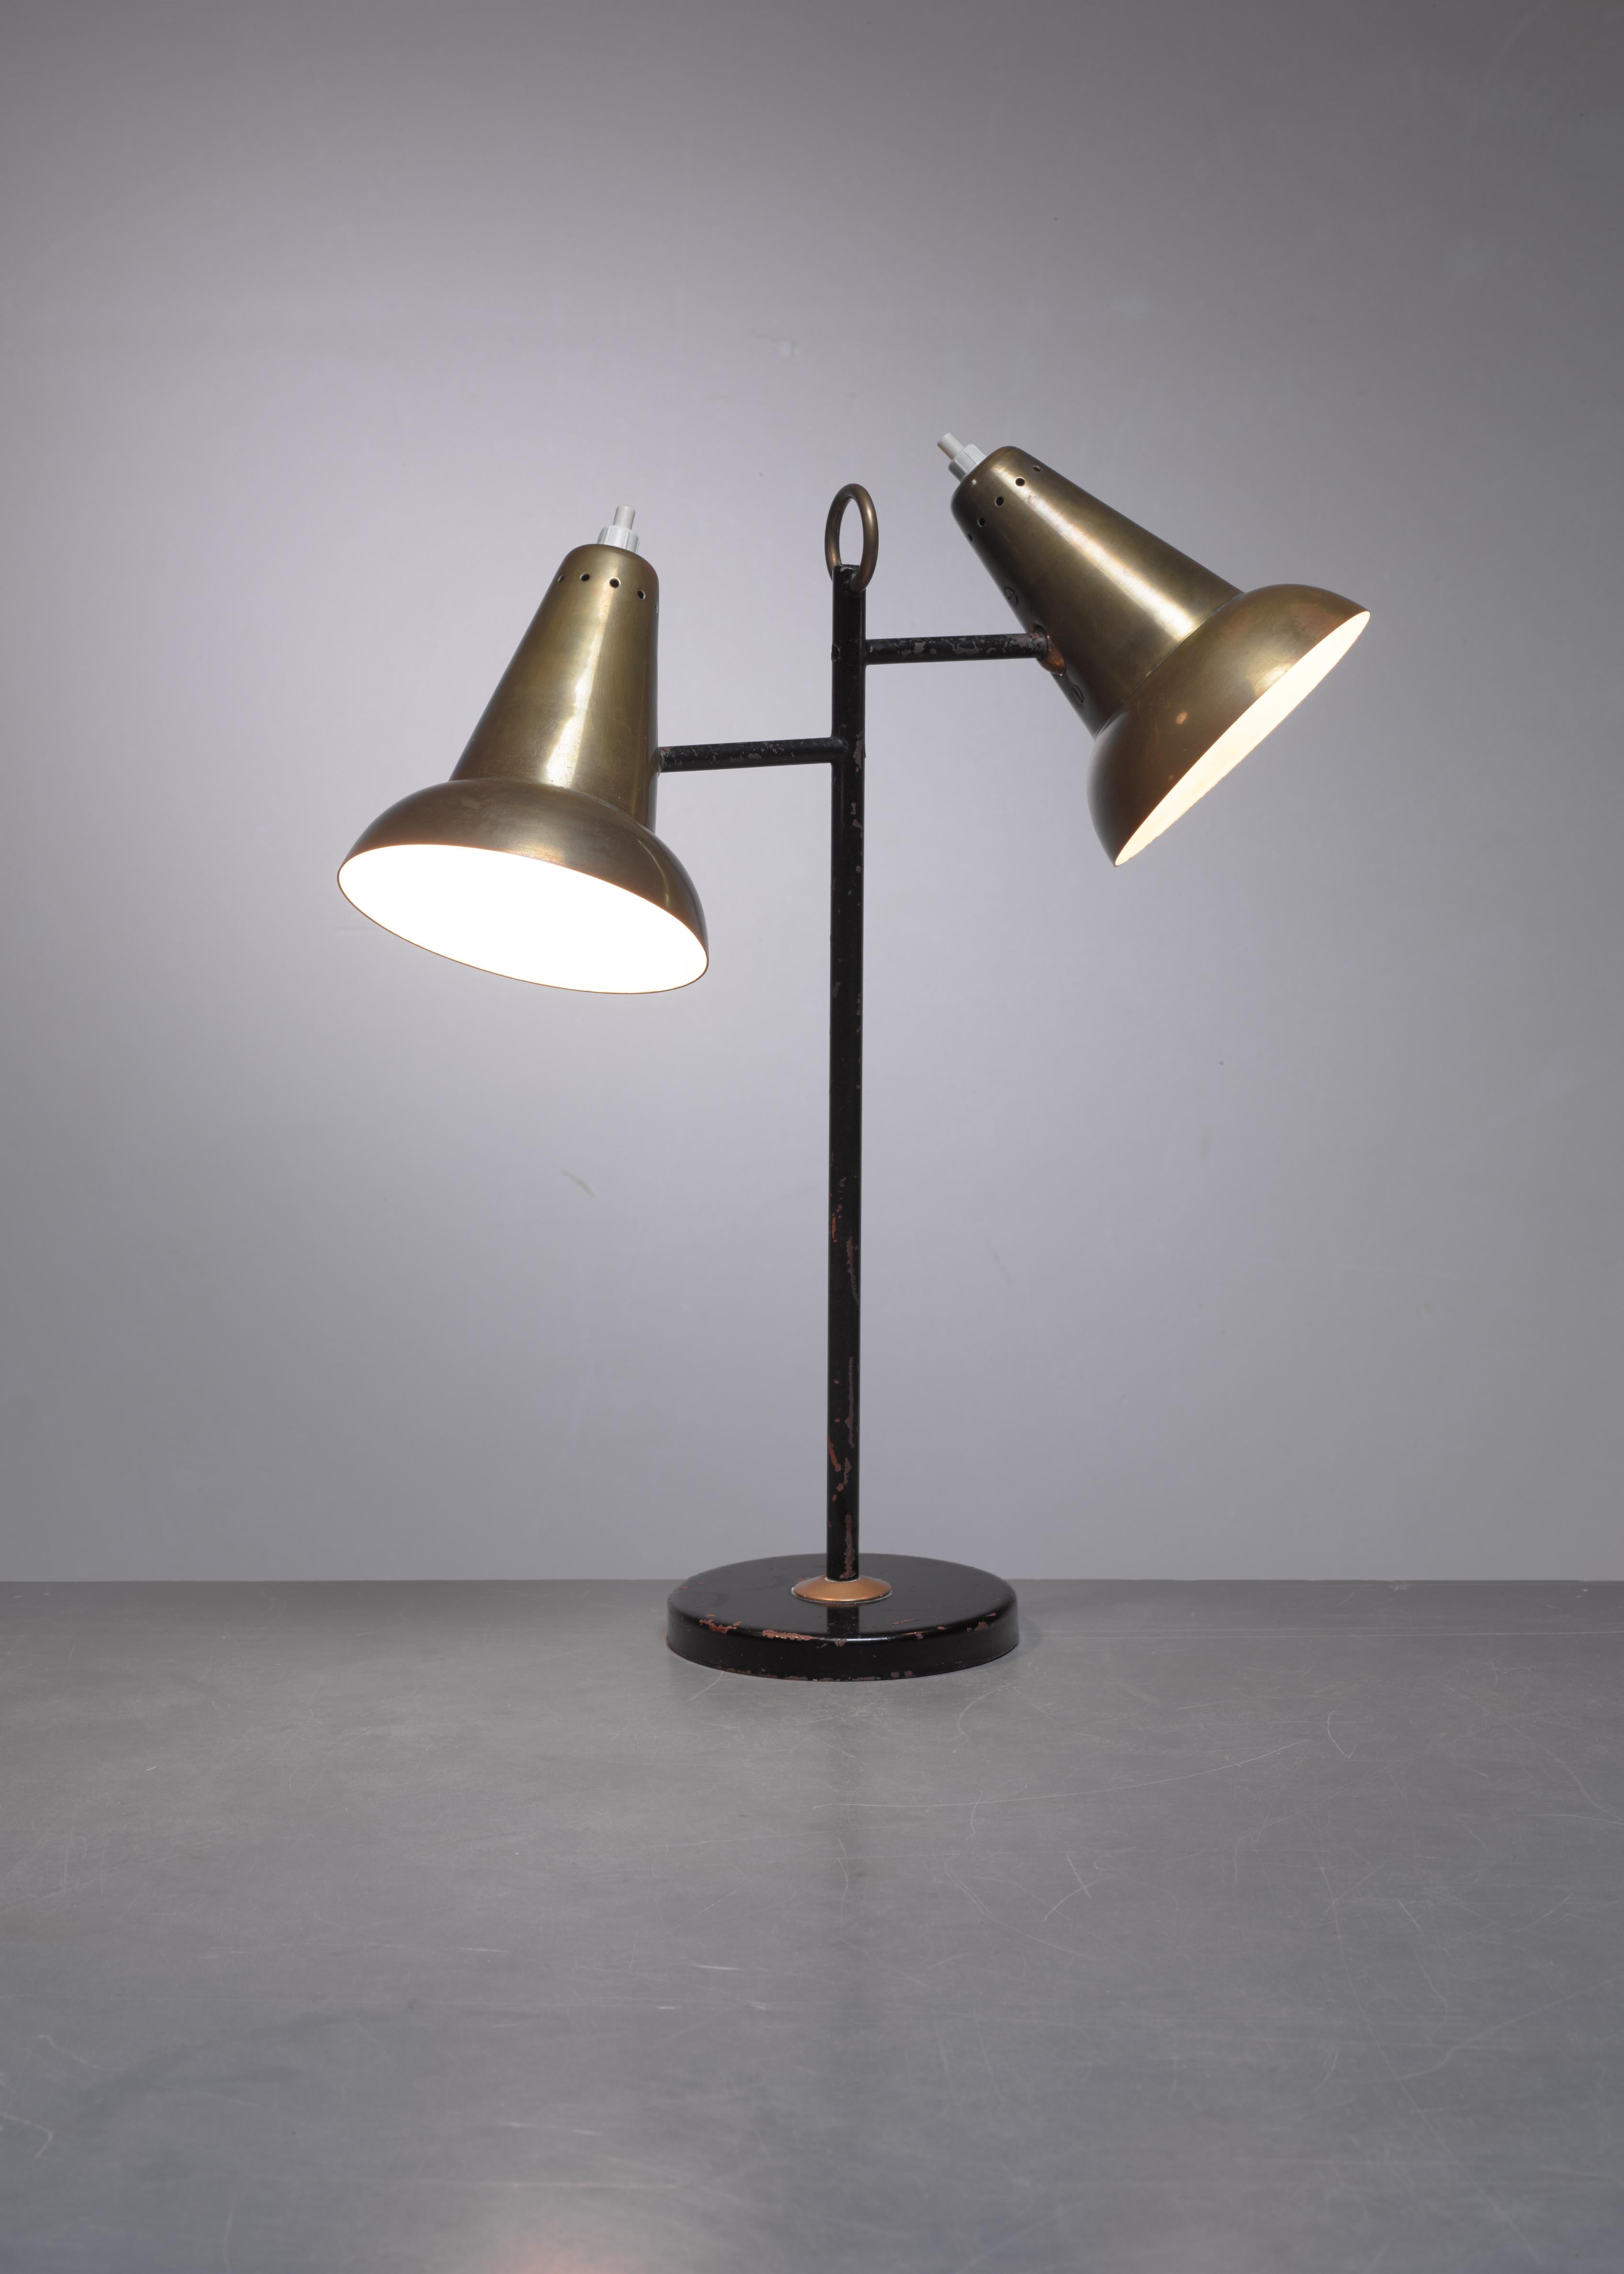 French Metal and Brass Table Lamps with Two Hoods, France, 1950s For Sale